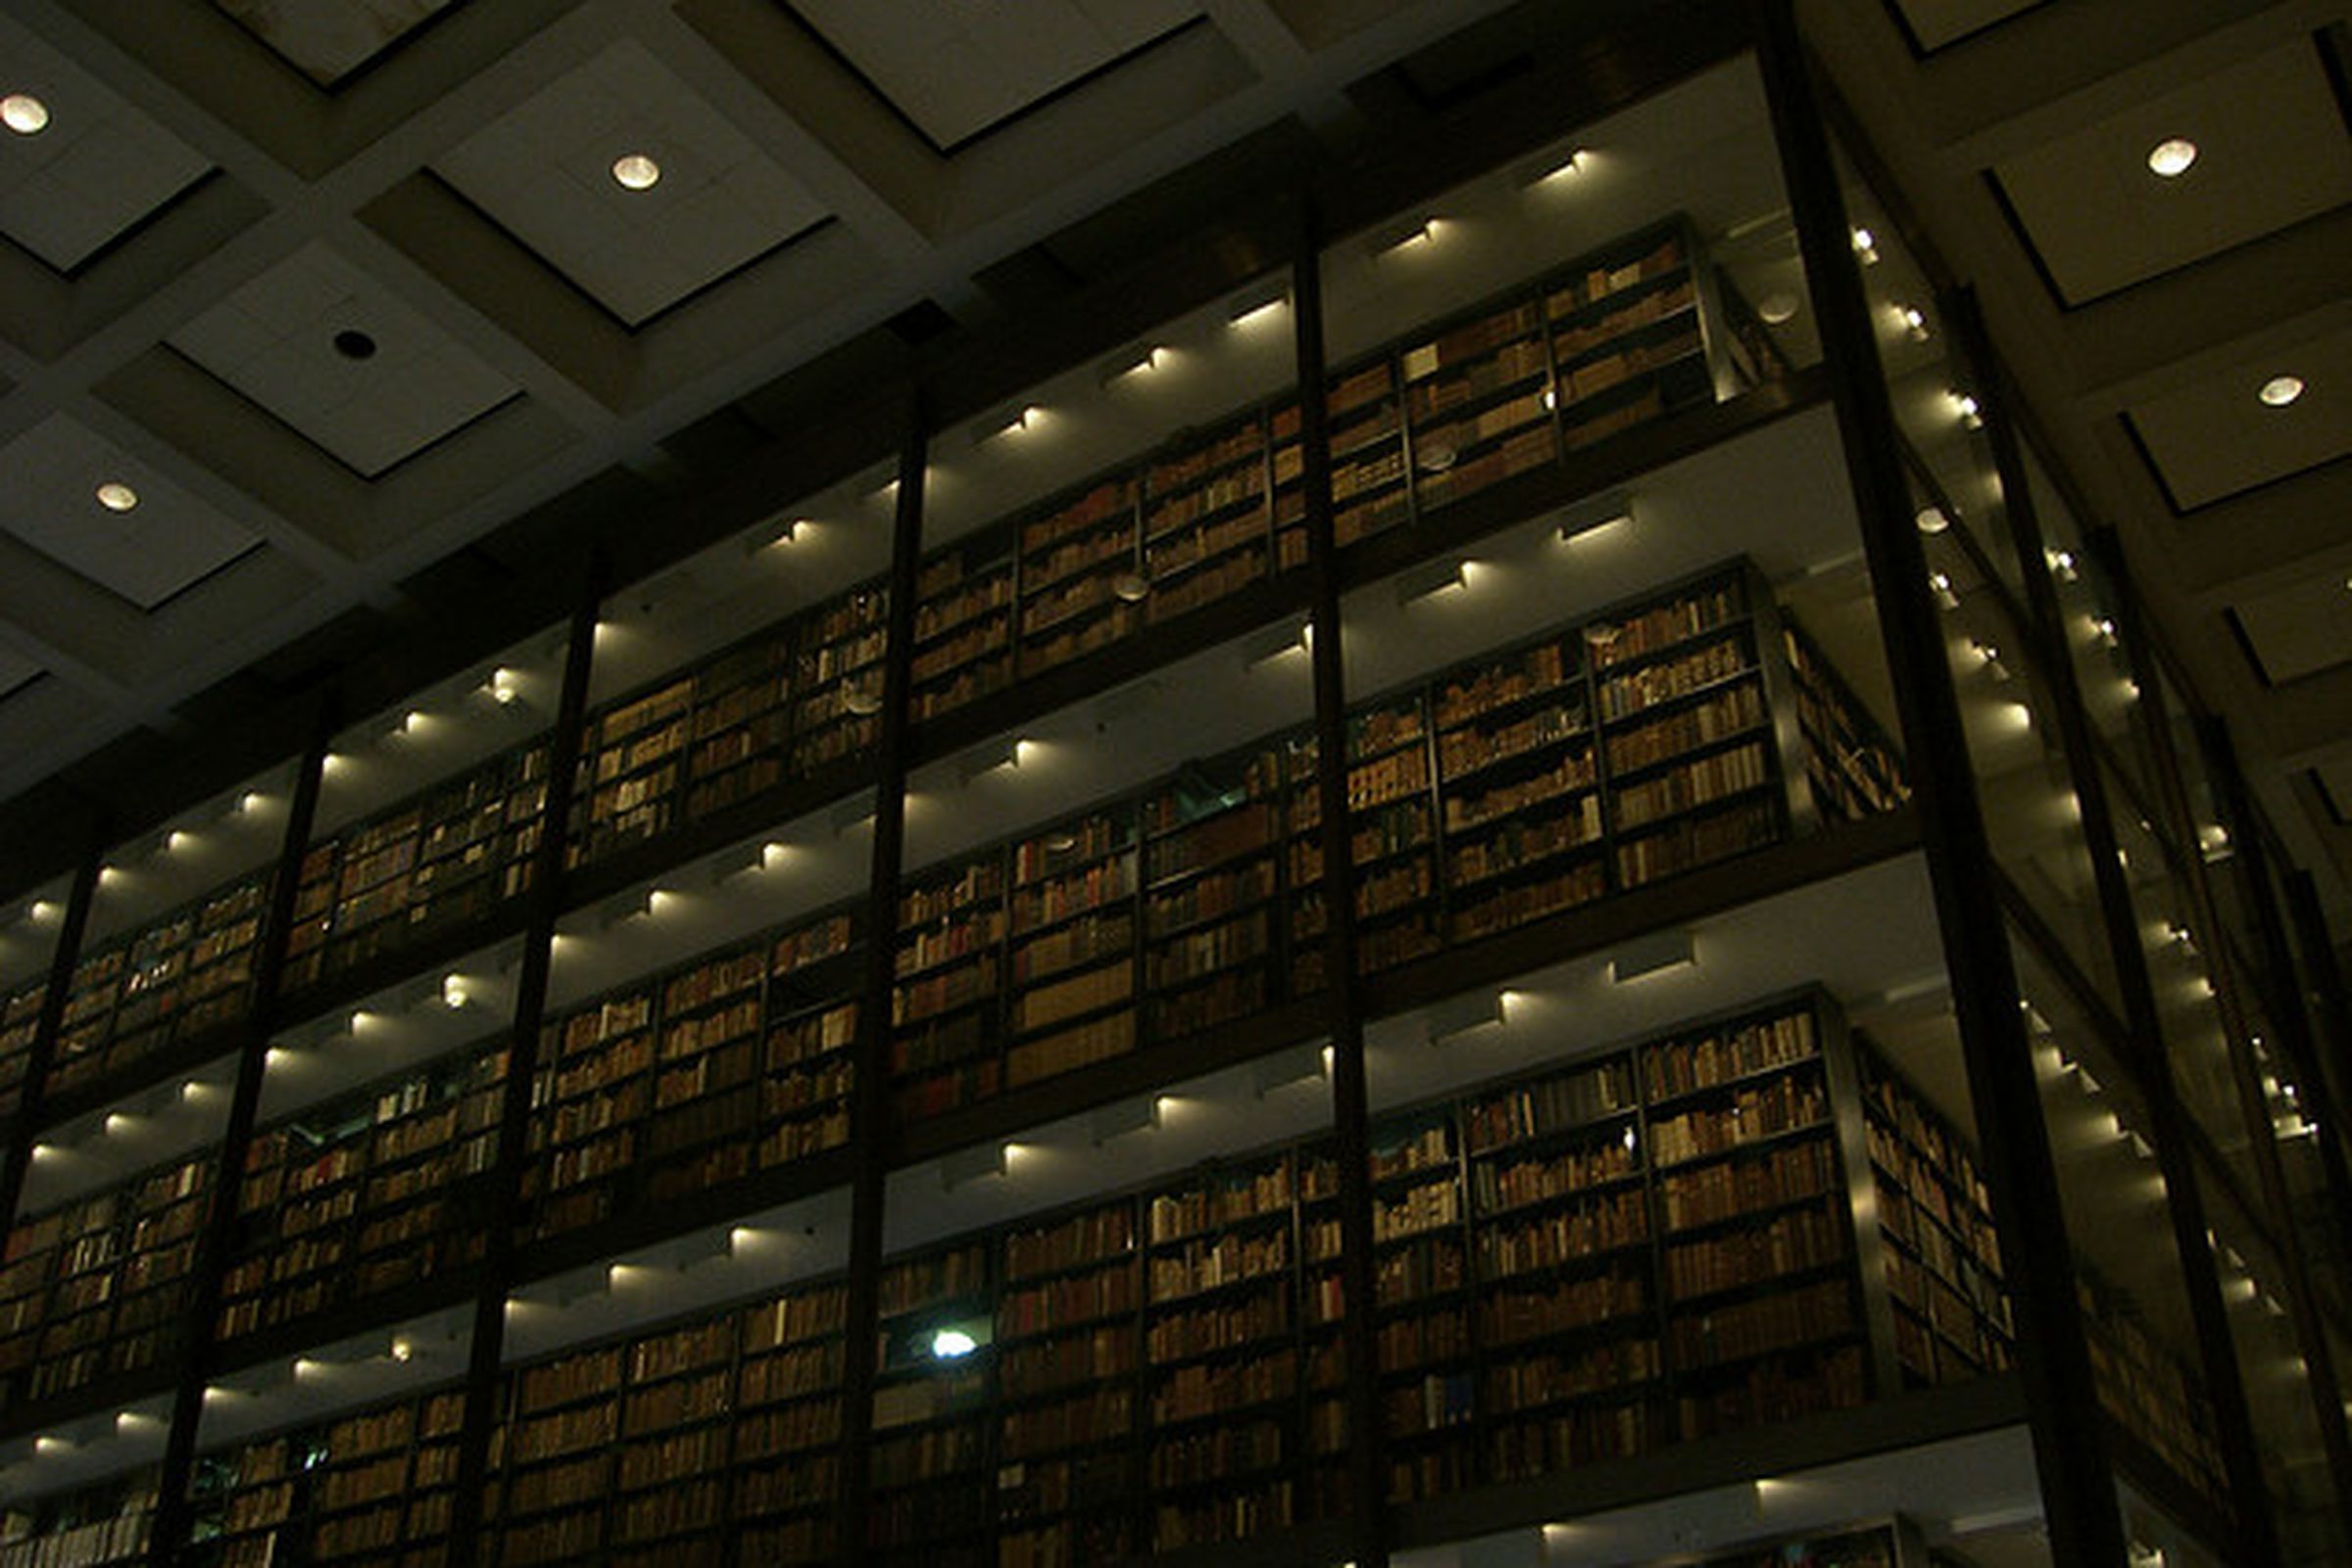 Yale's Beinecke Rare Book and Manuscript Library